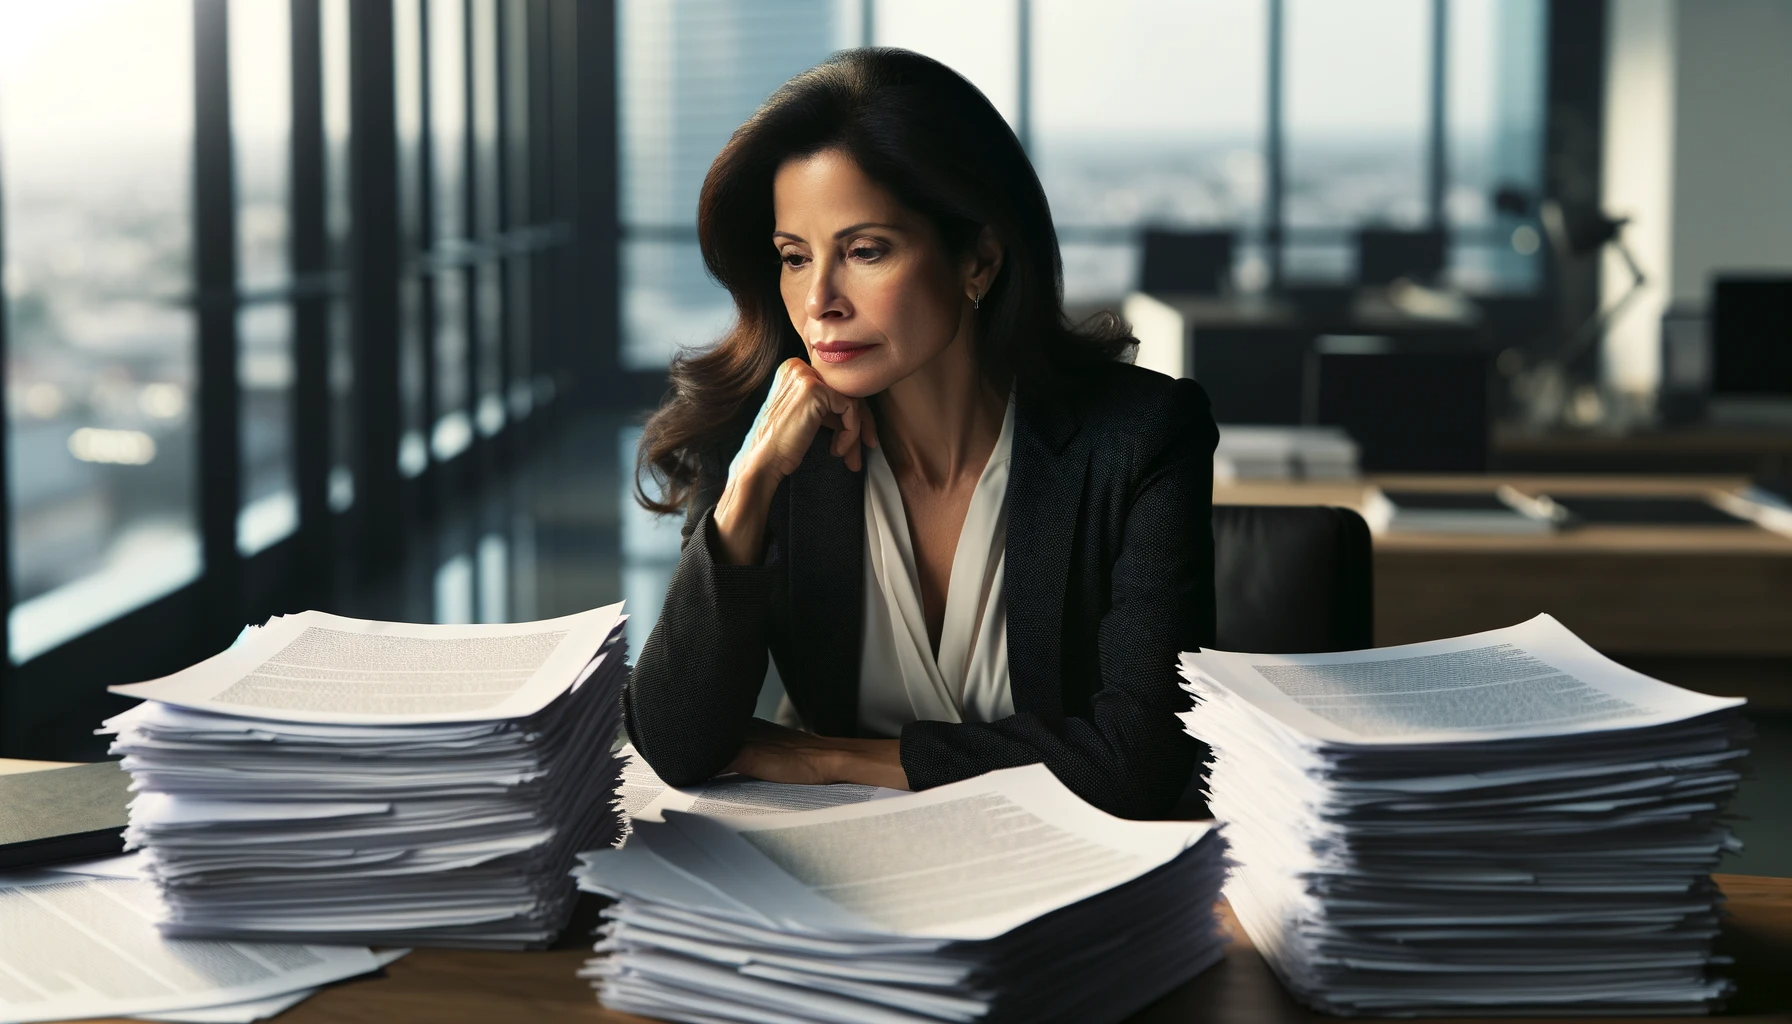 a 40-year-old woman sits at an office table contemplating next to three stacks of paper